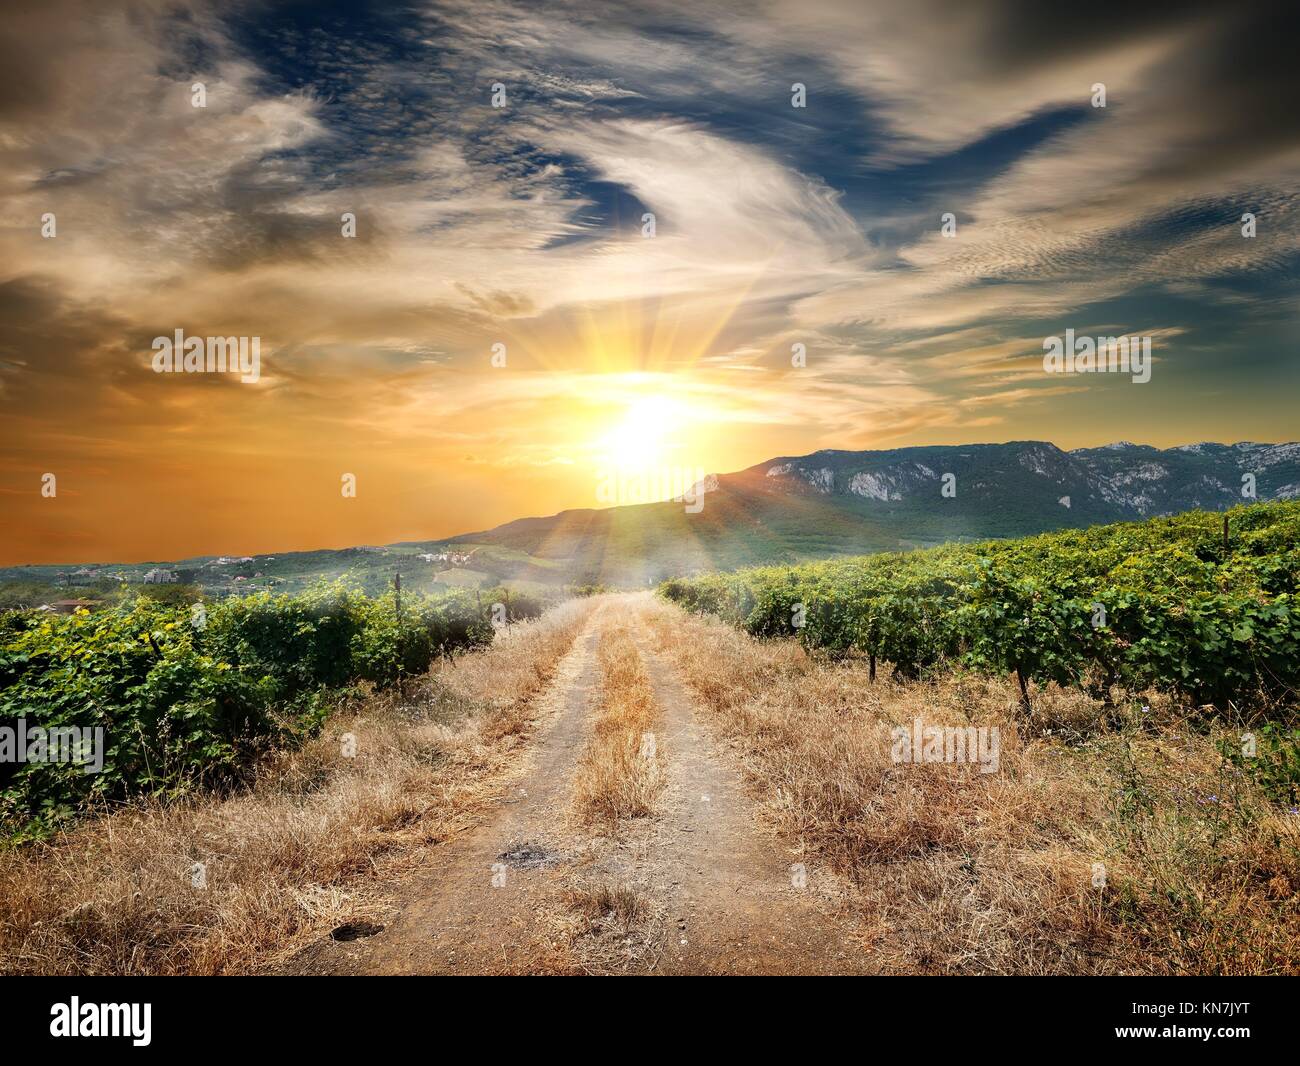 Country road through a vineyard in autumn. Stock Photo